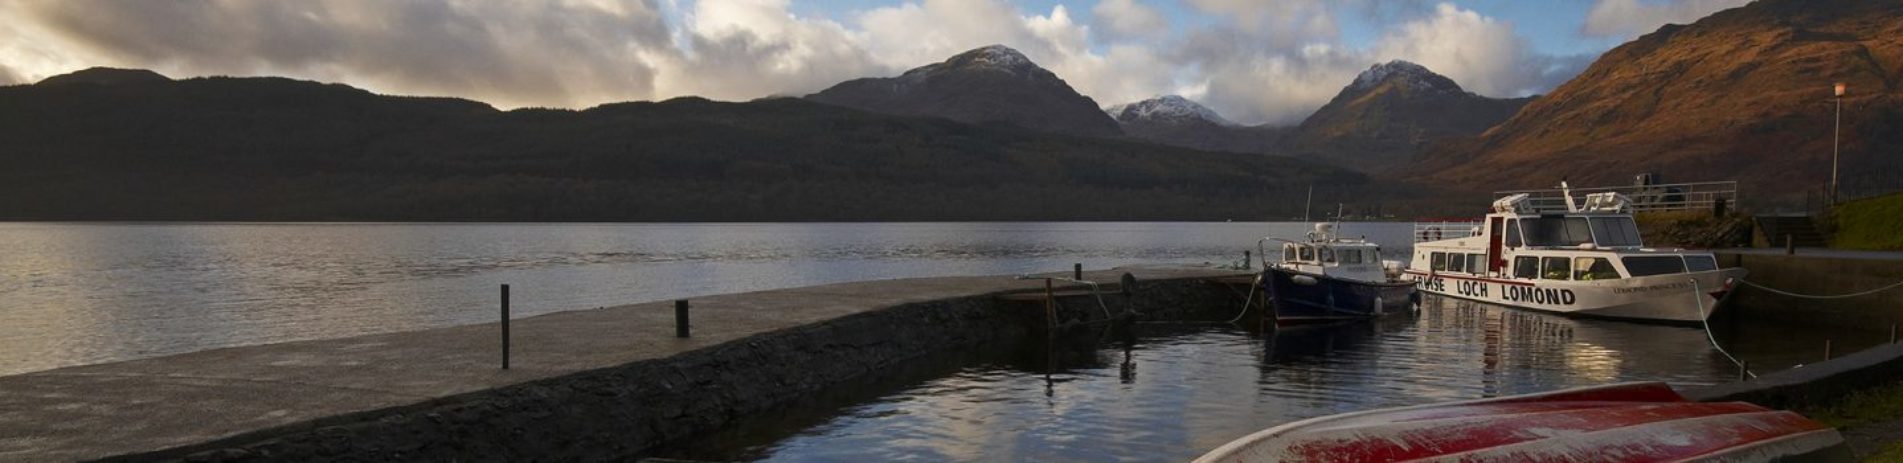 pier-and-boats-at-inversnaid-on-loch-lomond-with-arrochar-alps-hills-in0-the-distance